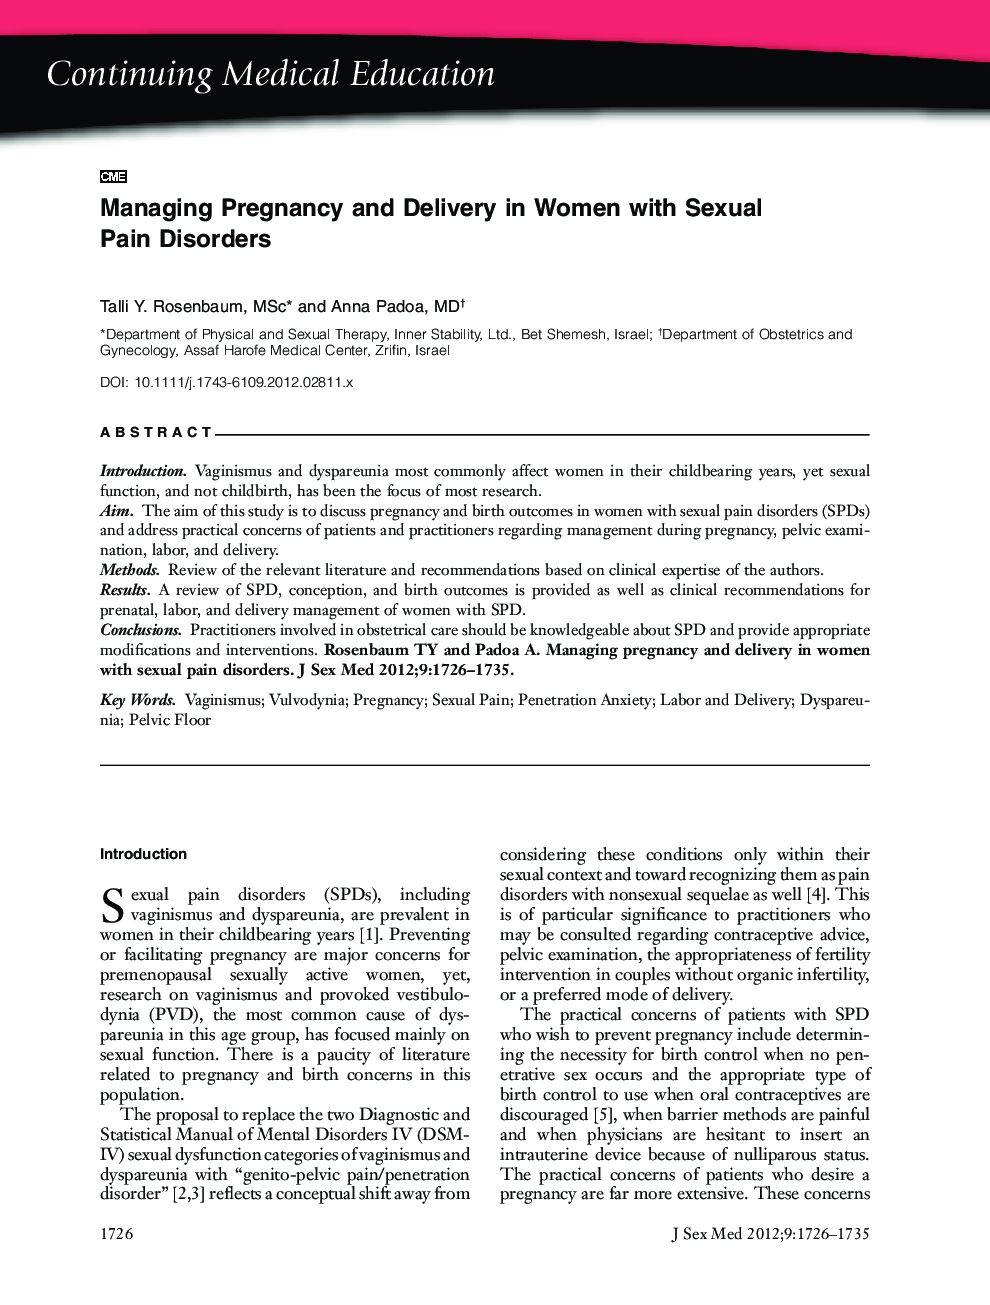 Managing Pregnancy and Delivery in Women with Sexual Pain Disorders (CME)